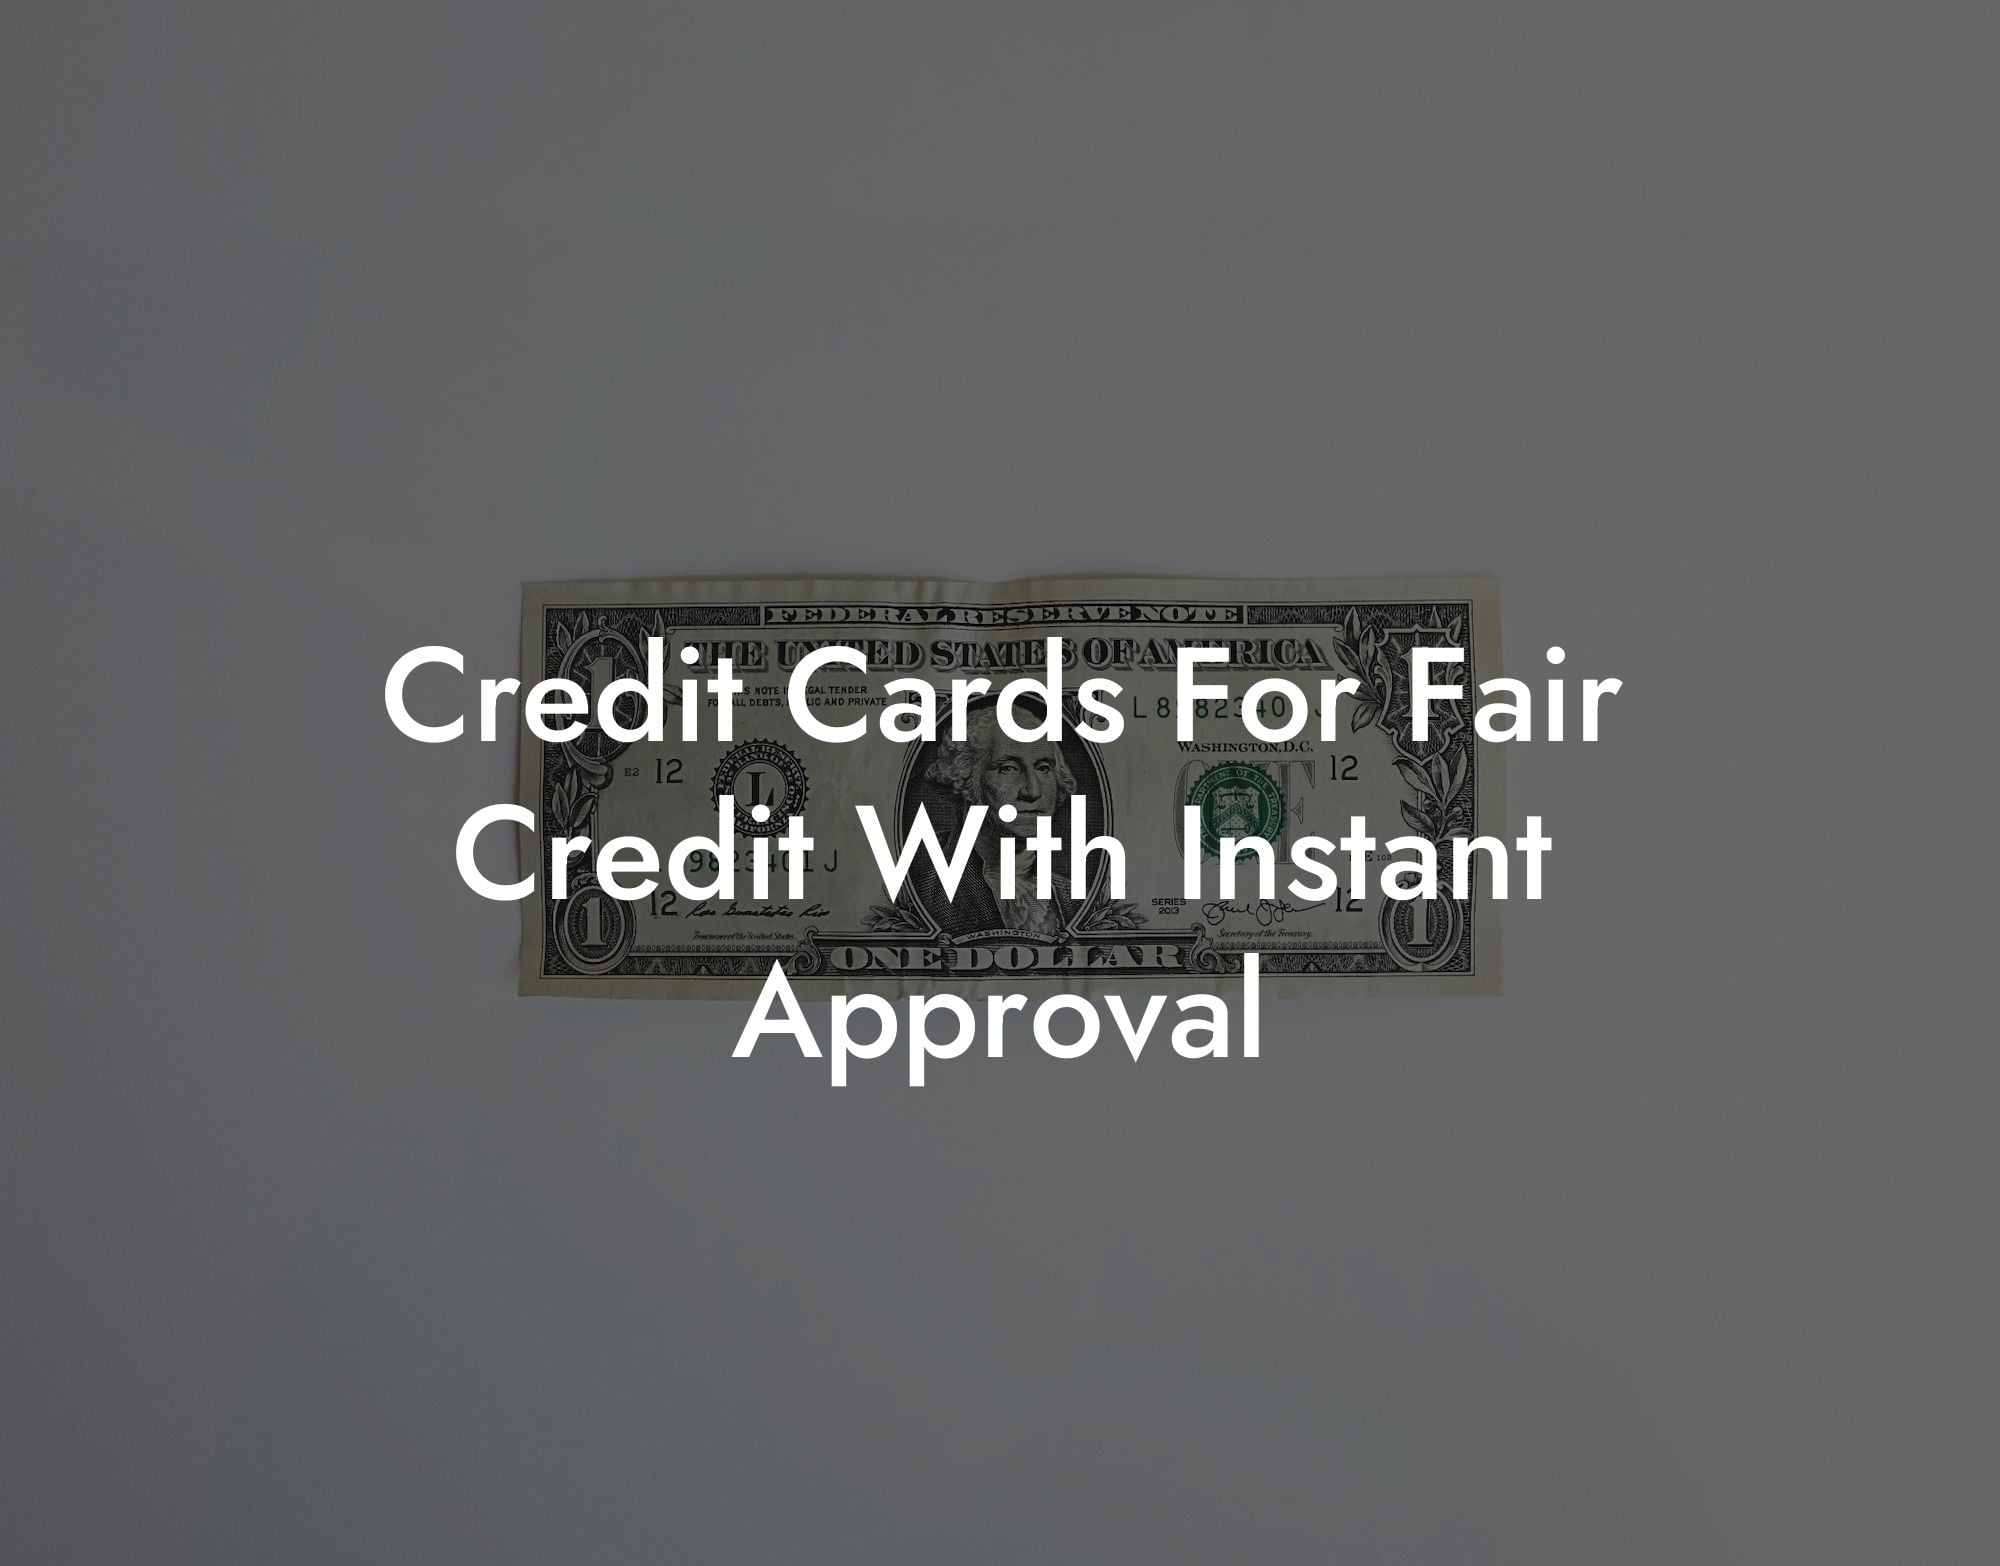 Credit Cards For Fair Credit With Instant Approval